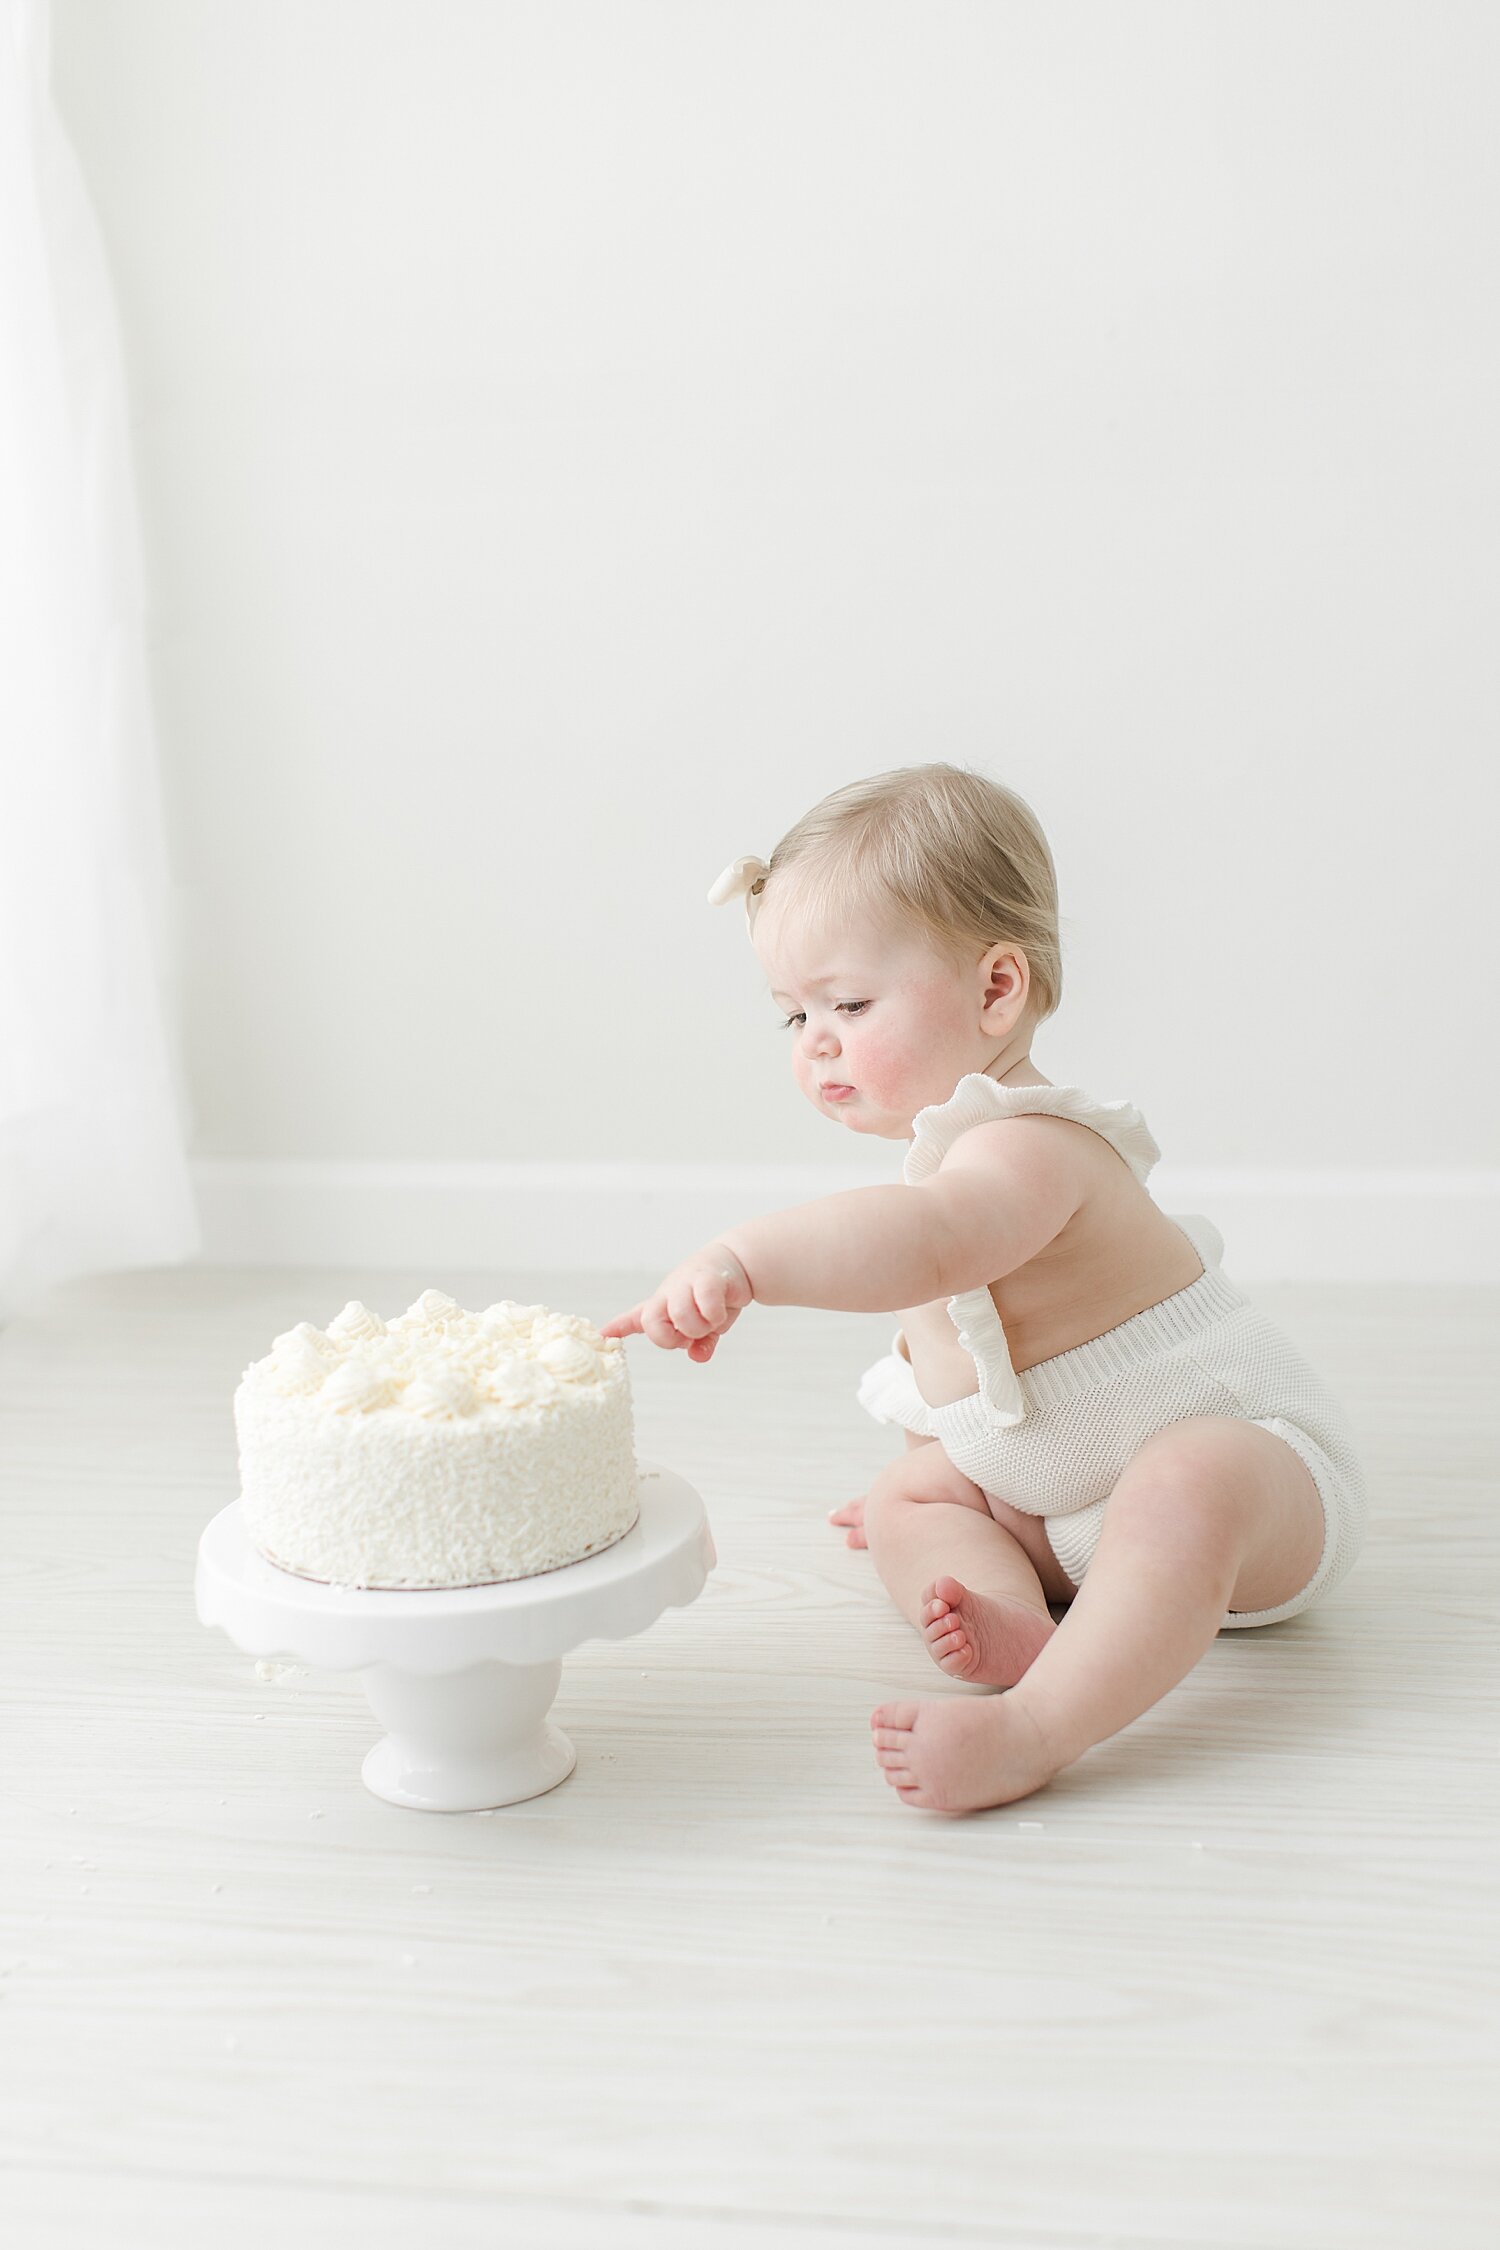 First birthday cake smash in studio in Darien, CT. Photo by Kristin Wood Photography.